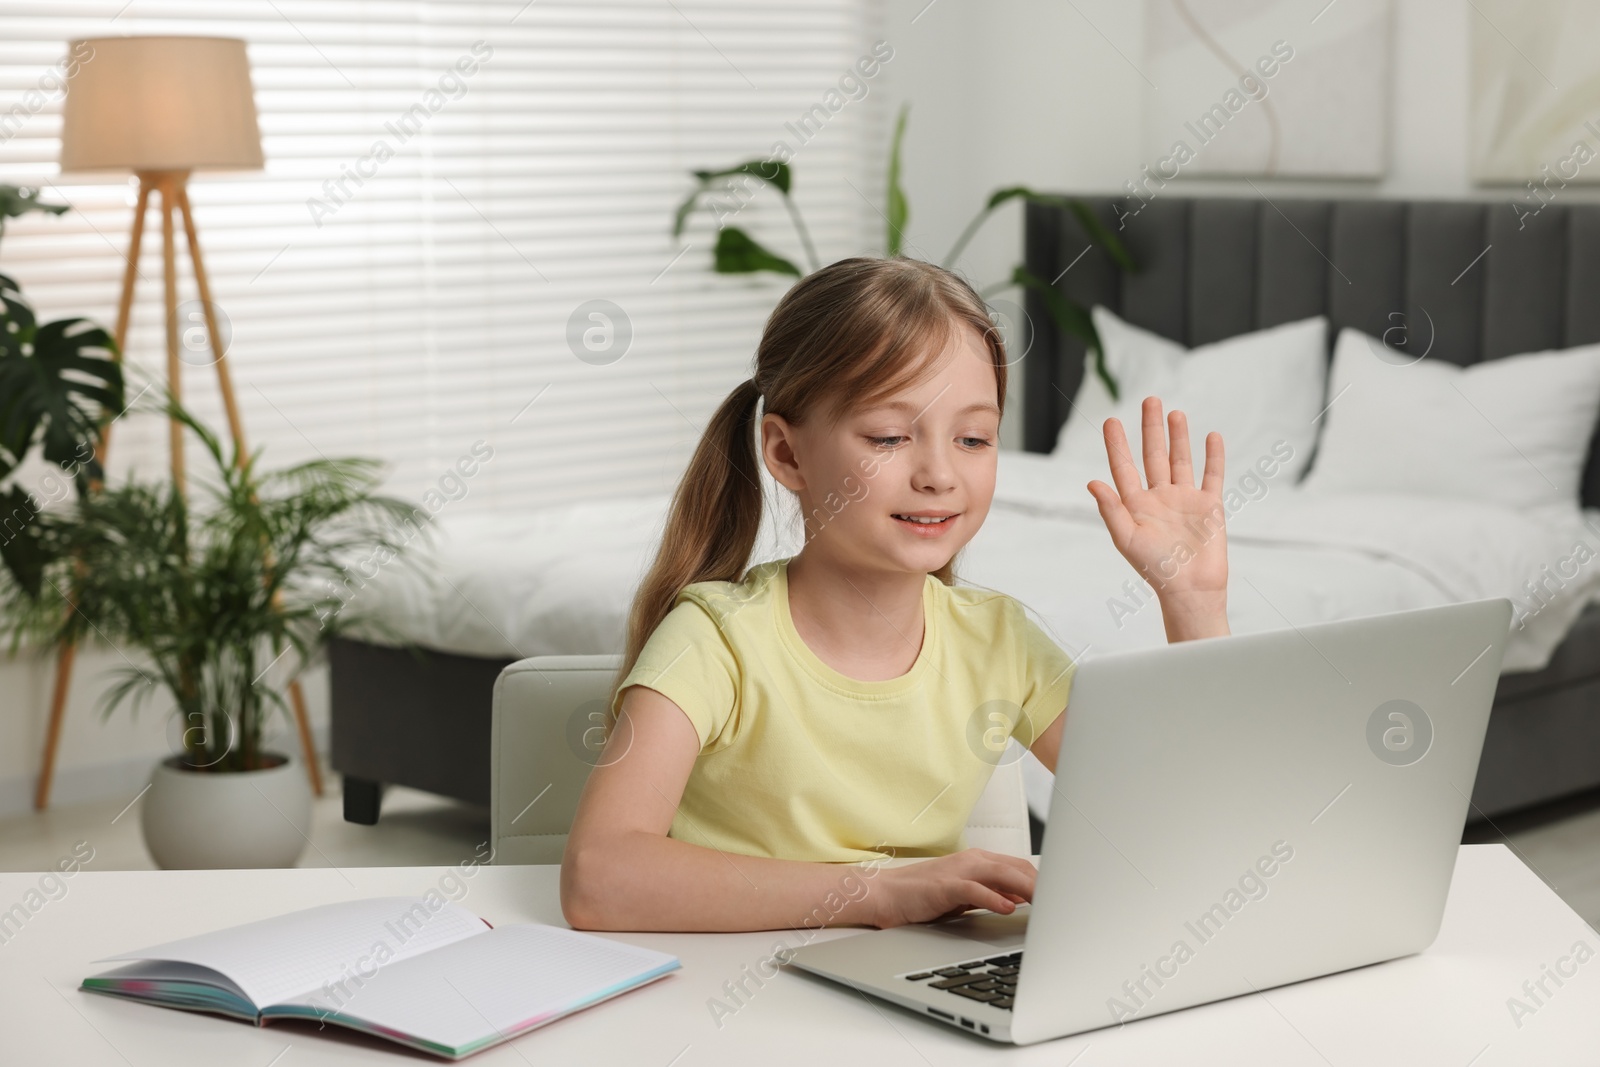 Photo of Cute girl waving hello during online lesson via laptop at white table indoors